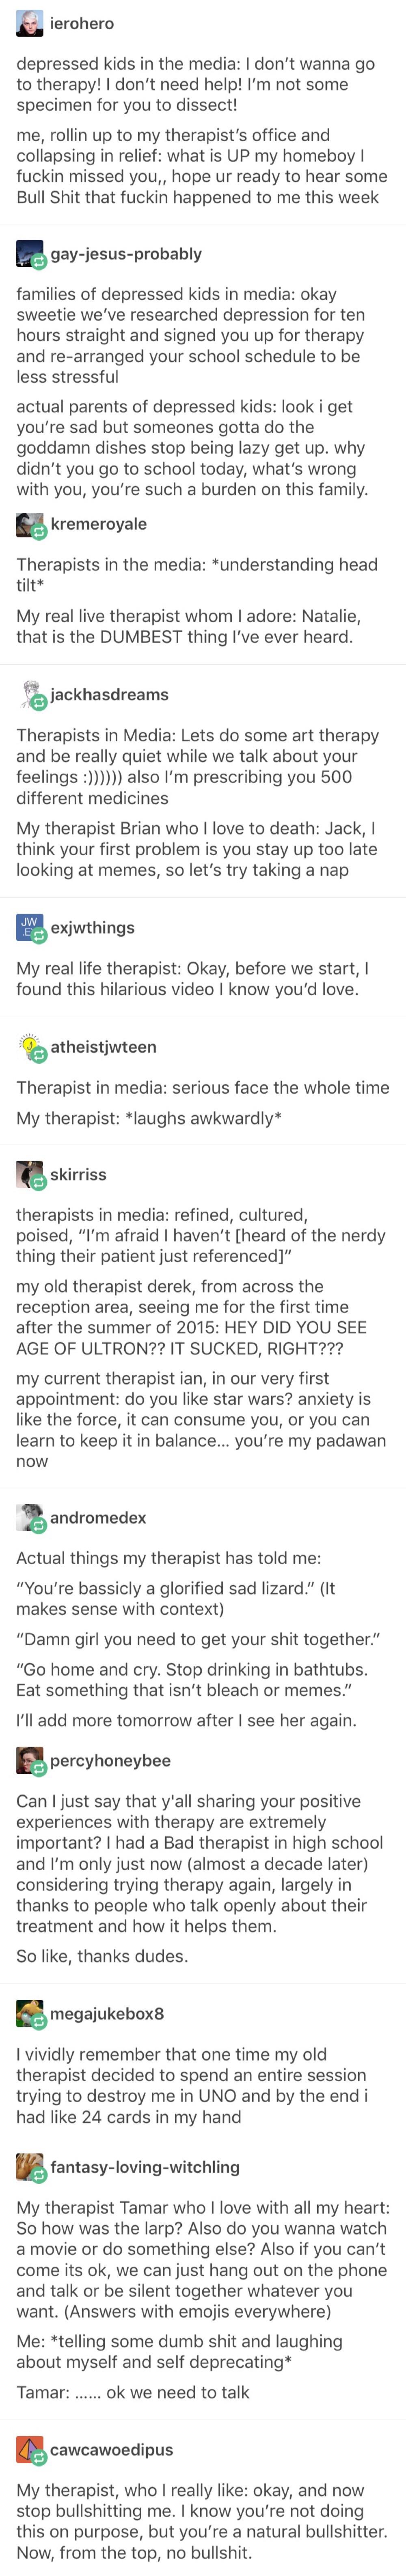 Therapy IRL